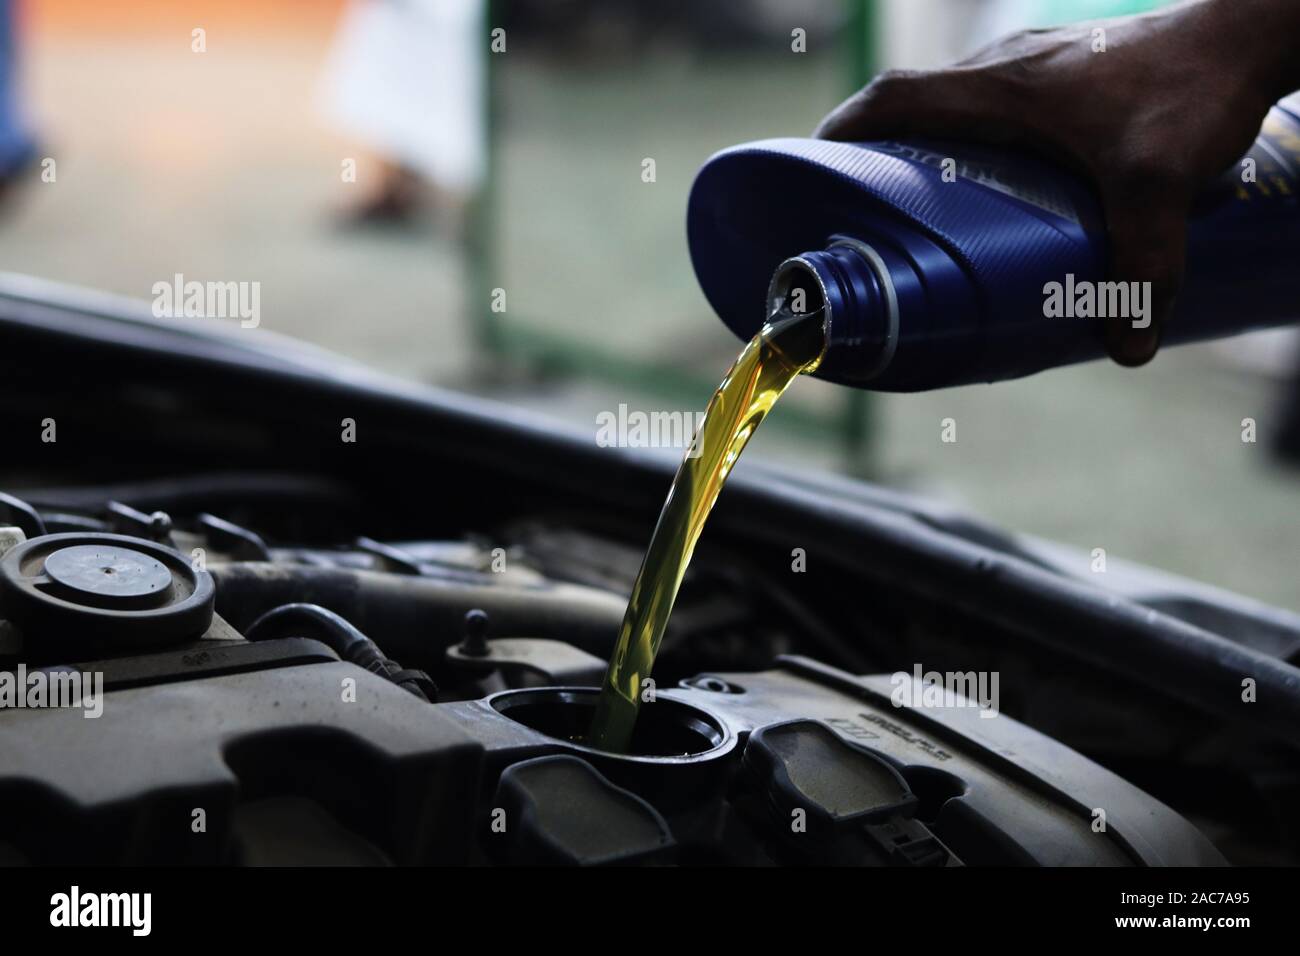 Mechanic pours motor oil into engine from blue plastic container Stock Photo